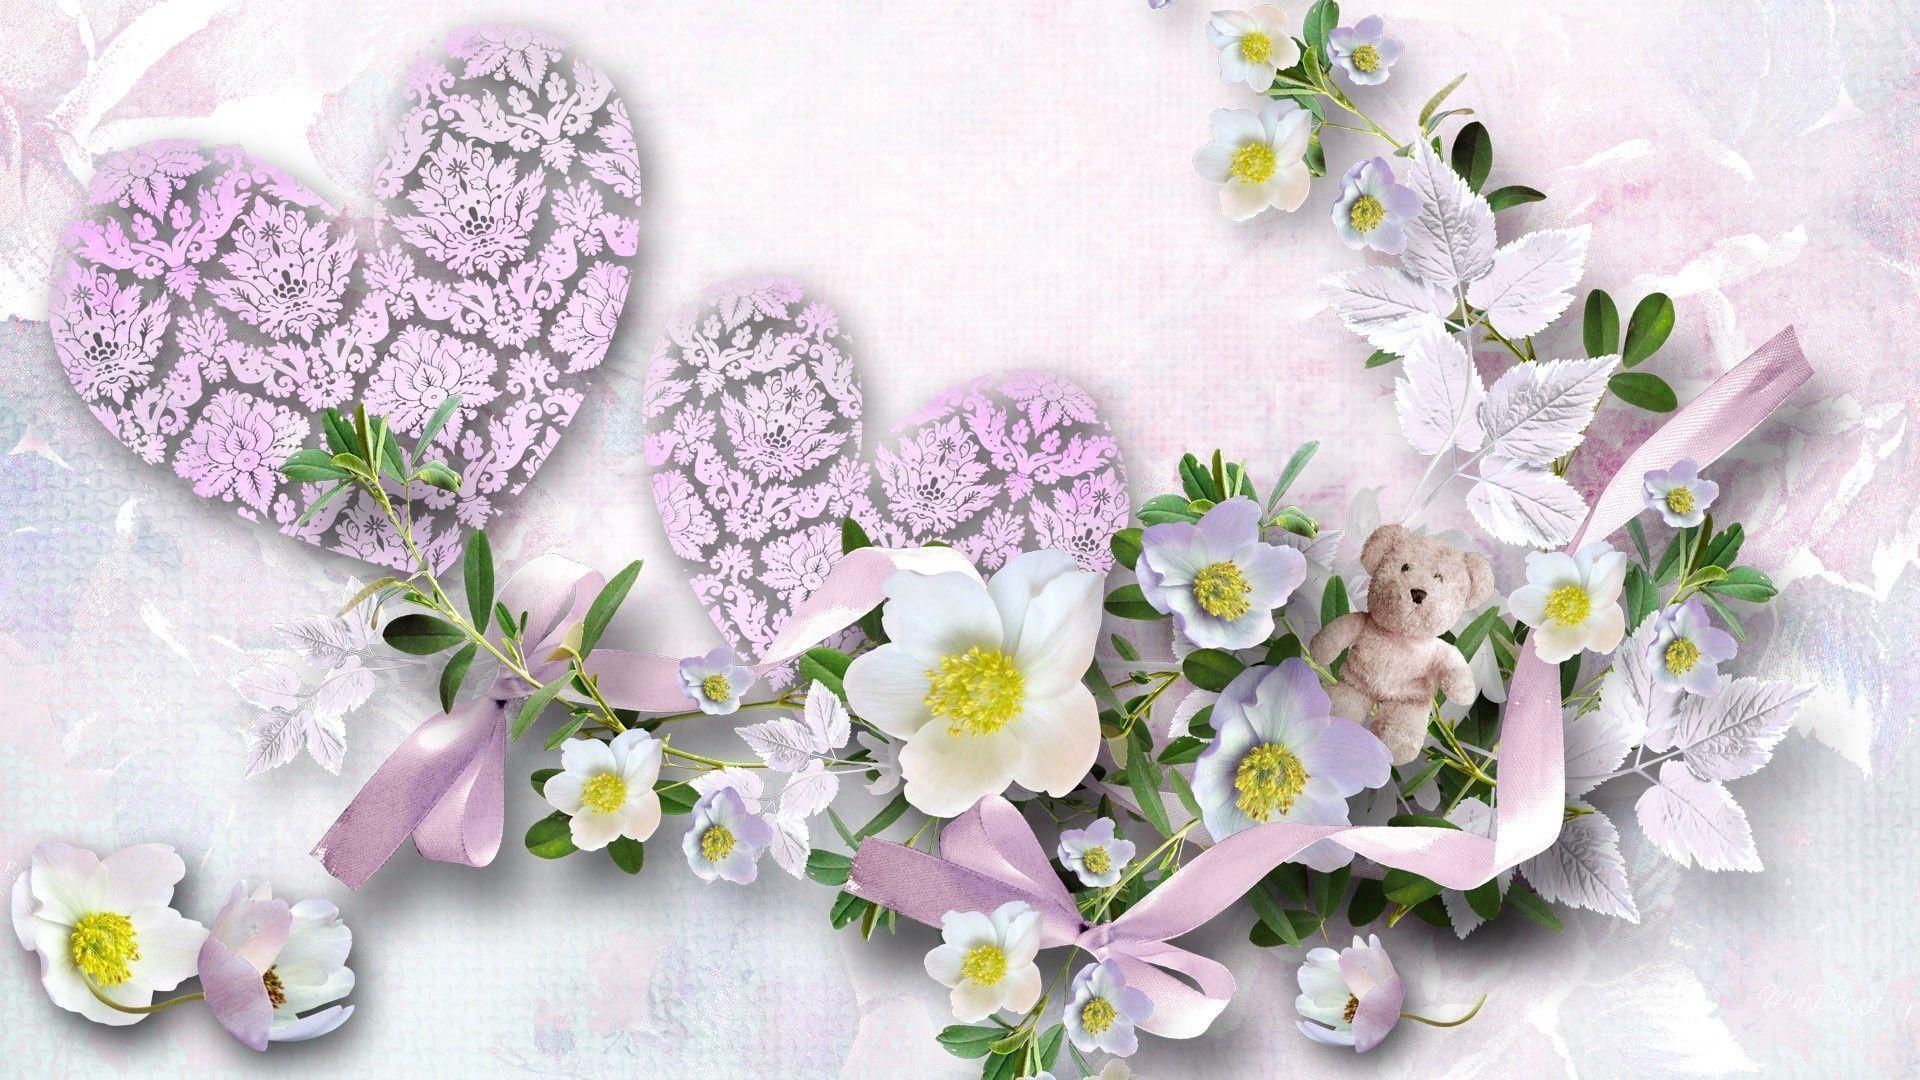 Flowers and hearts wallpapers 1920x1080 px